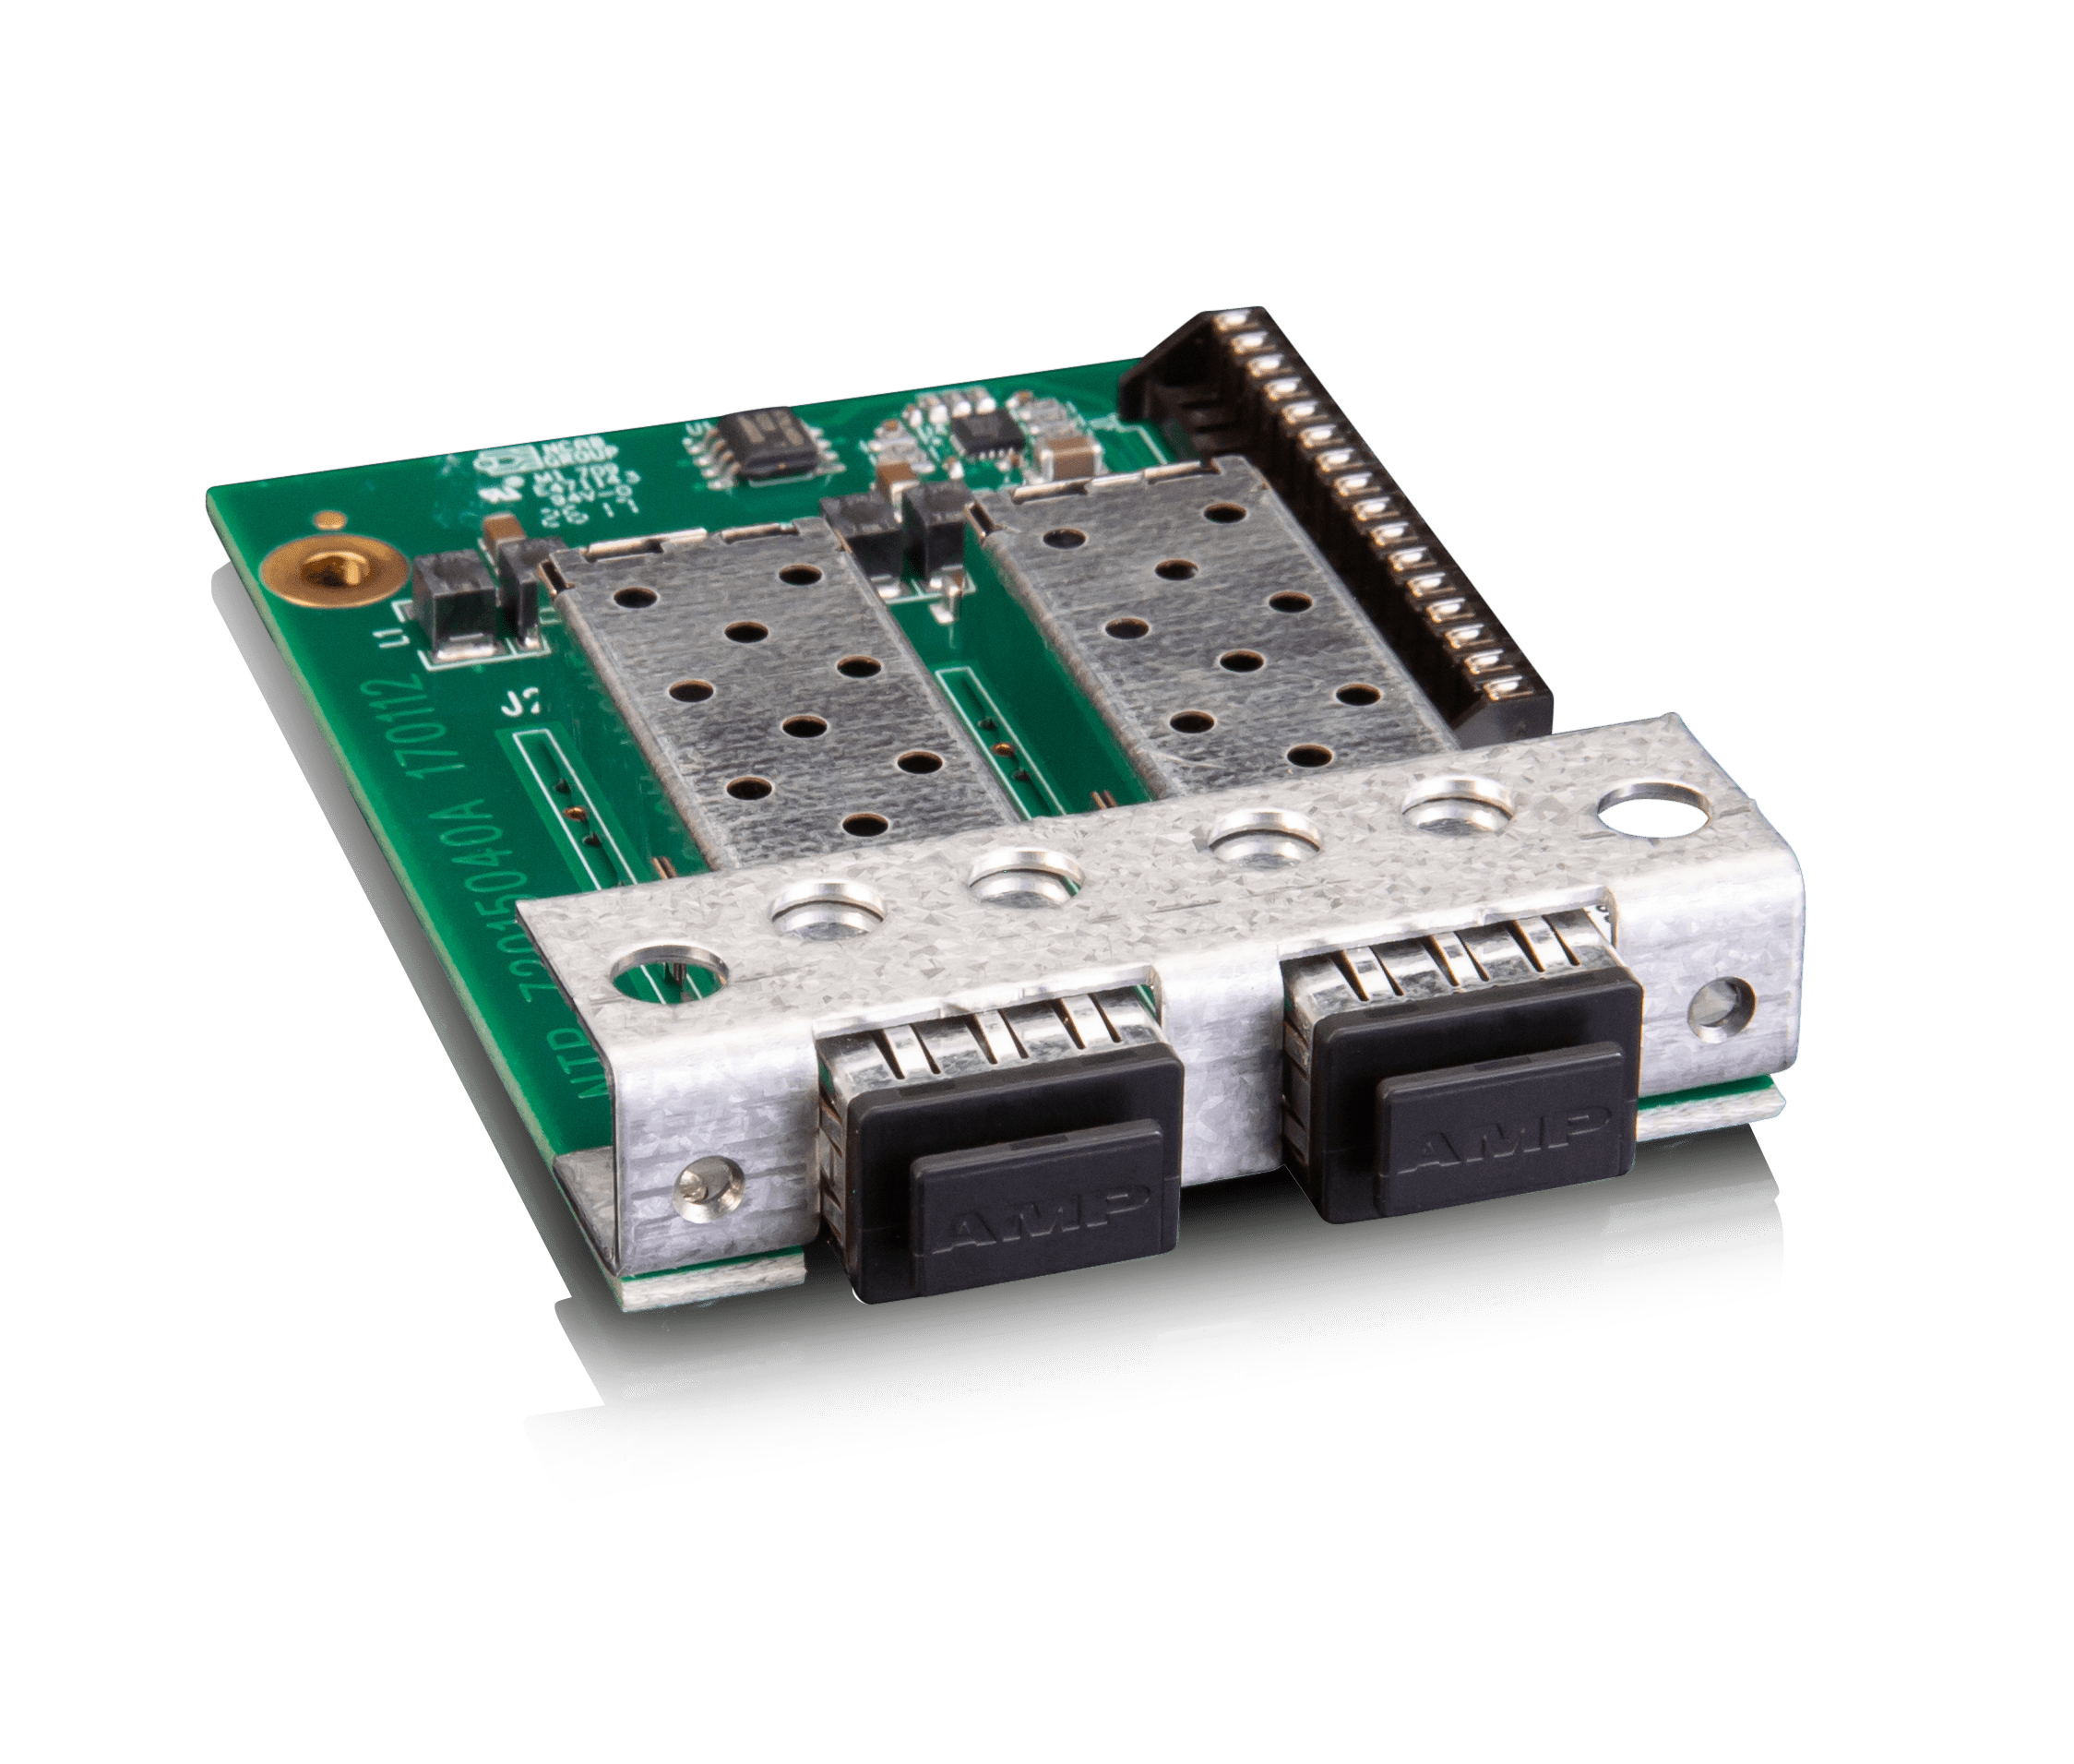 Avid MTRX MADI Module For Base Unit (Without SFP Transciever) - Professional Audio Design, Inc